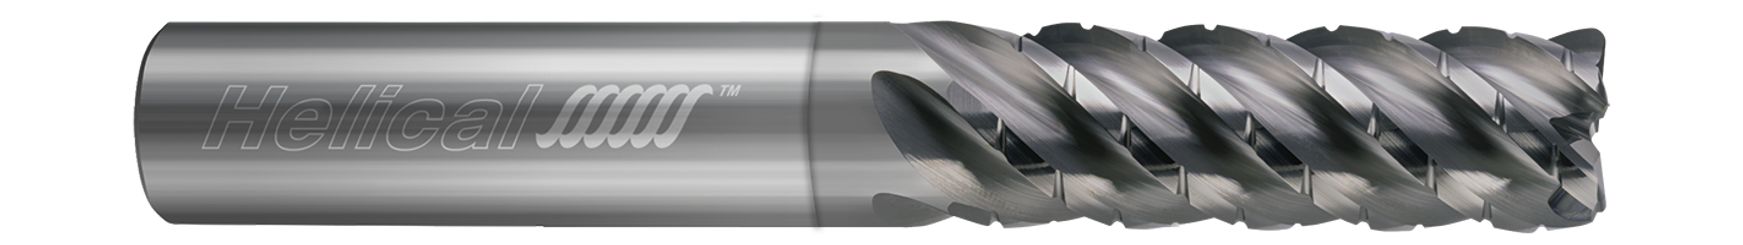 5 Flute-Corner Radius-Chipbreaker Rougher-Variable Pitch-For High Efficiency Milling